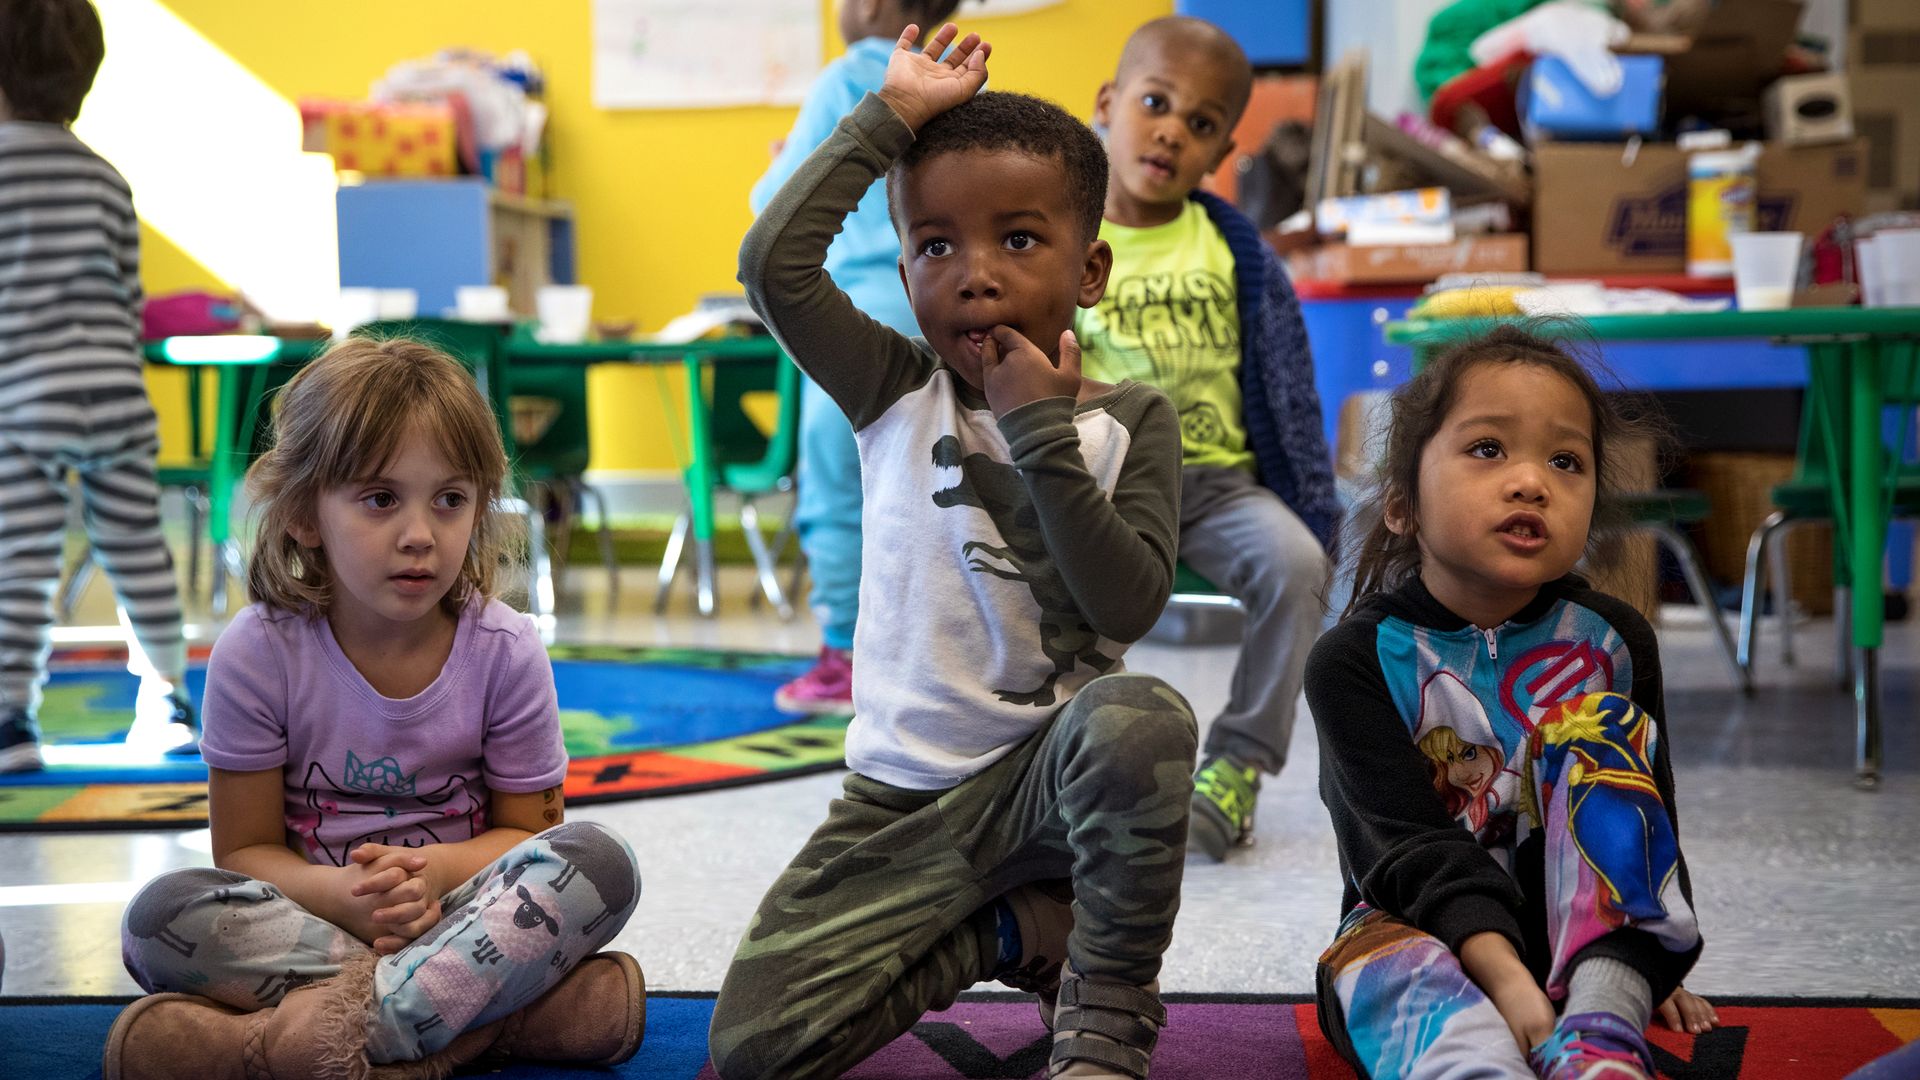 Noah Goliday in his pre-K class in Washington, D.C. Photo: Evelyn Hockstein/For The Washington Post via Getty Image